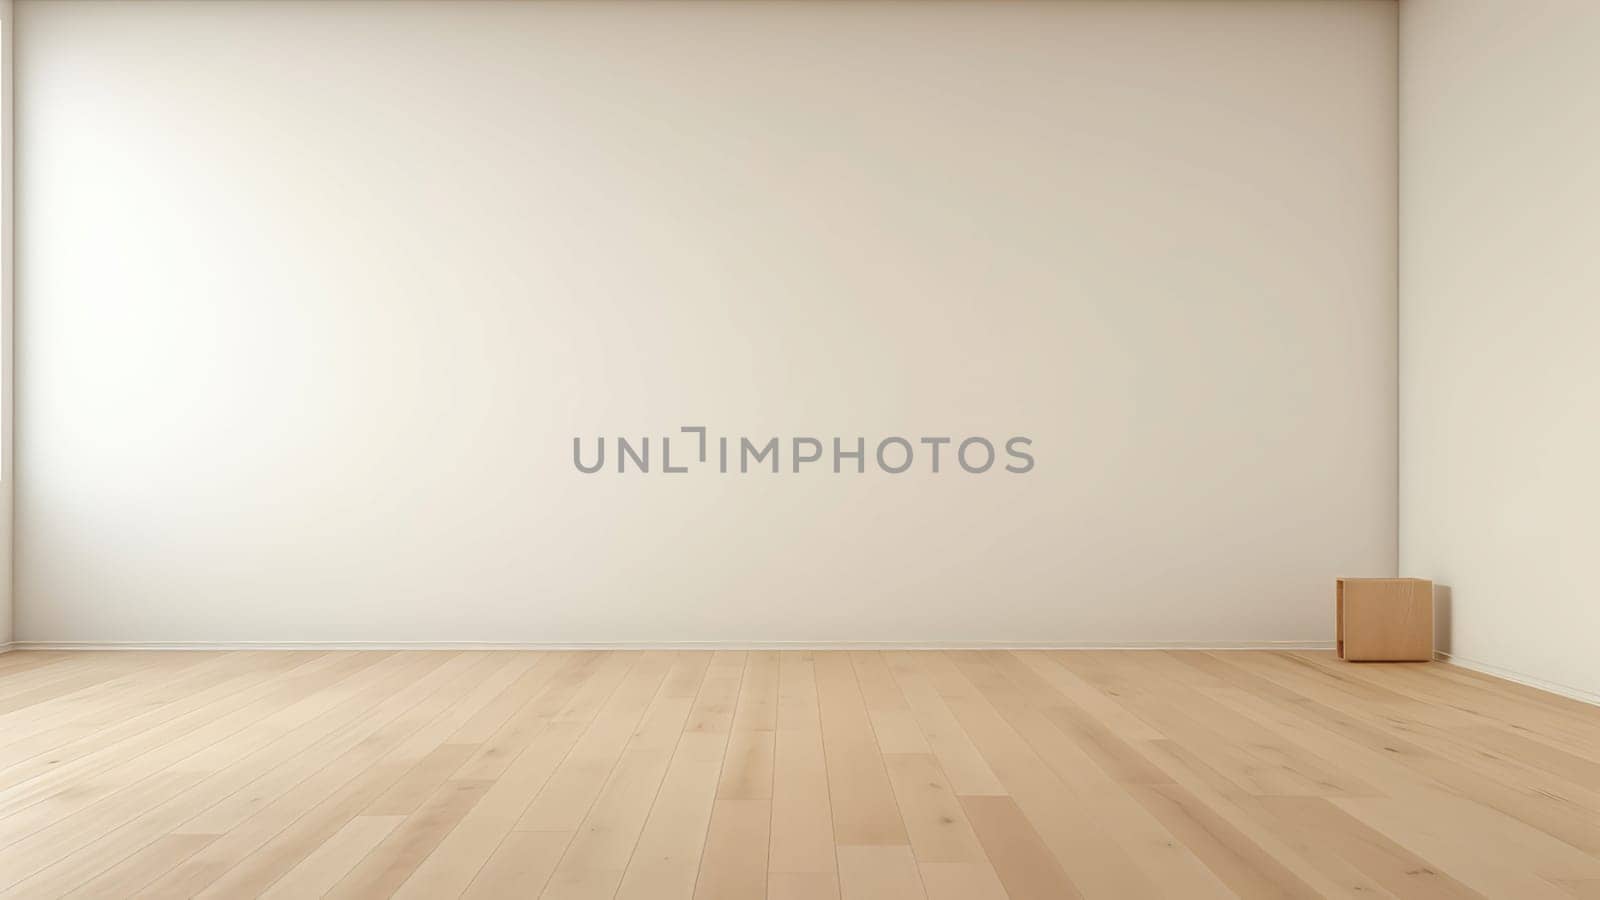 3D Rendering of the empty room with white walls and a box on wooden floor. The room is simple and uncluttered, and it creates a sense of peace and tranquility.